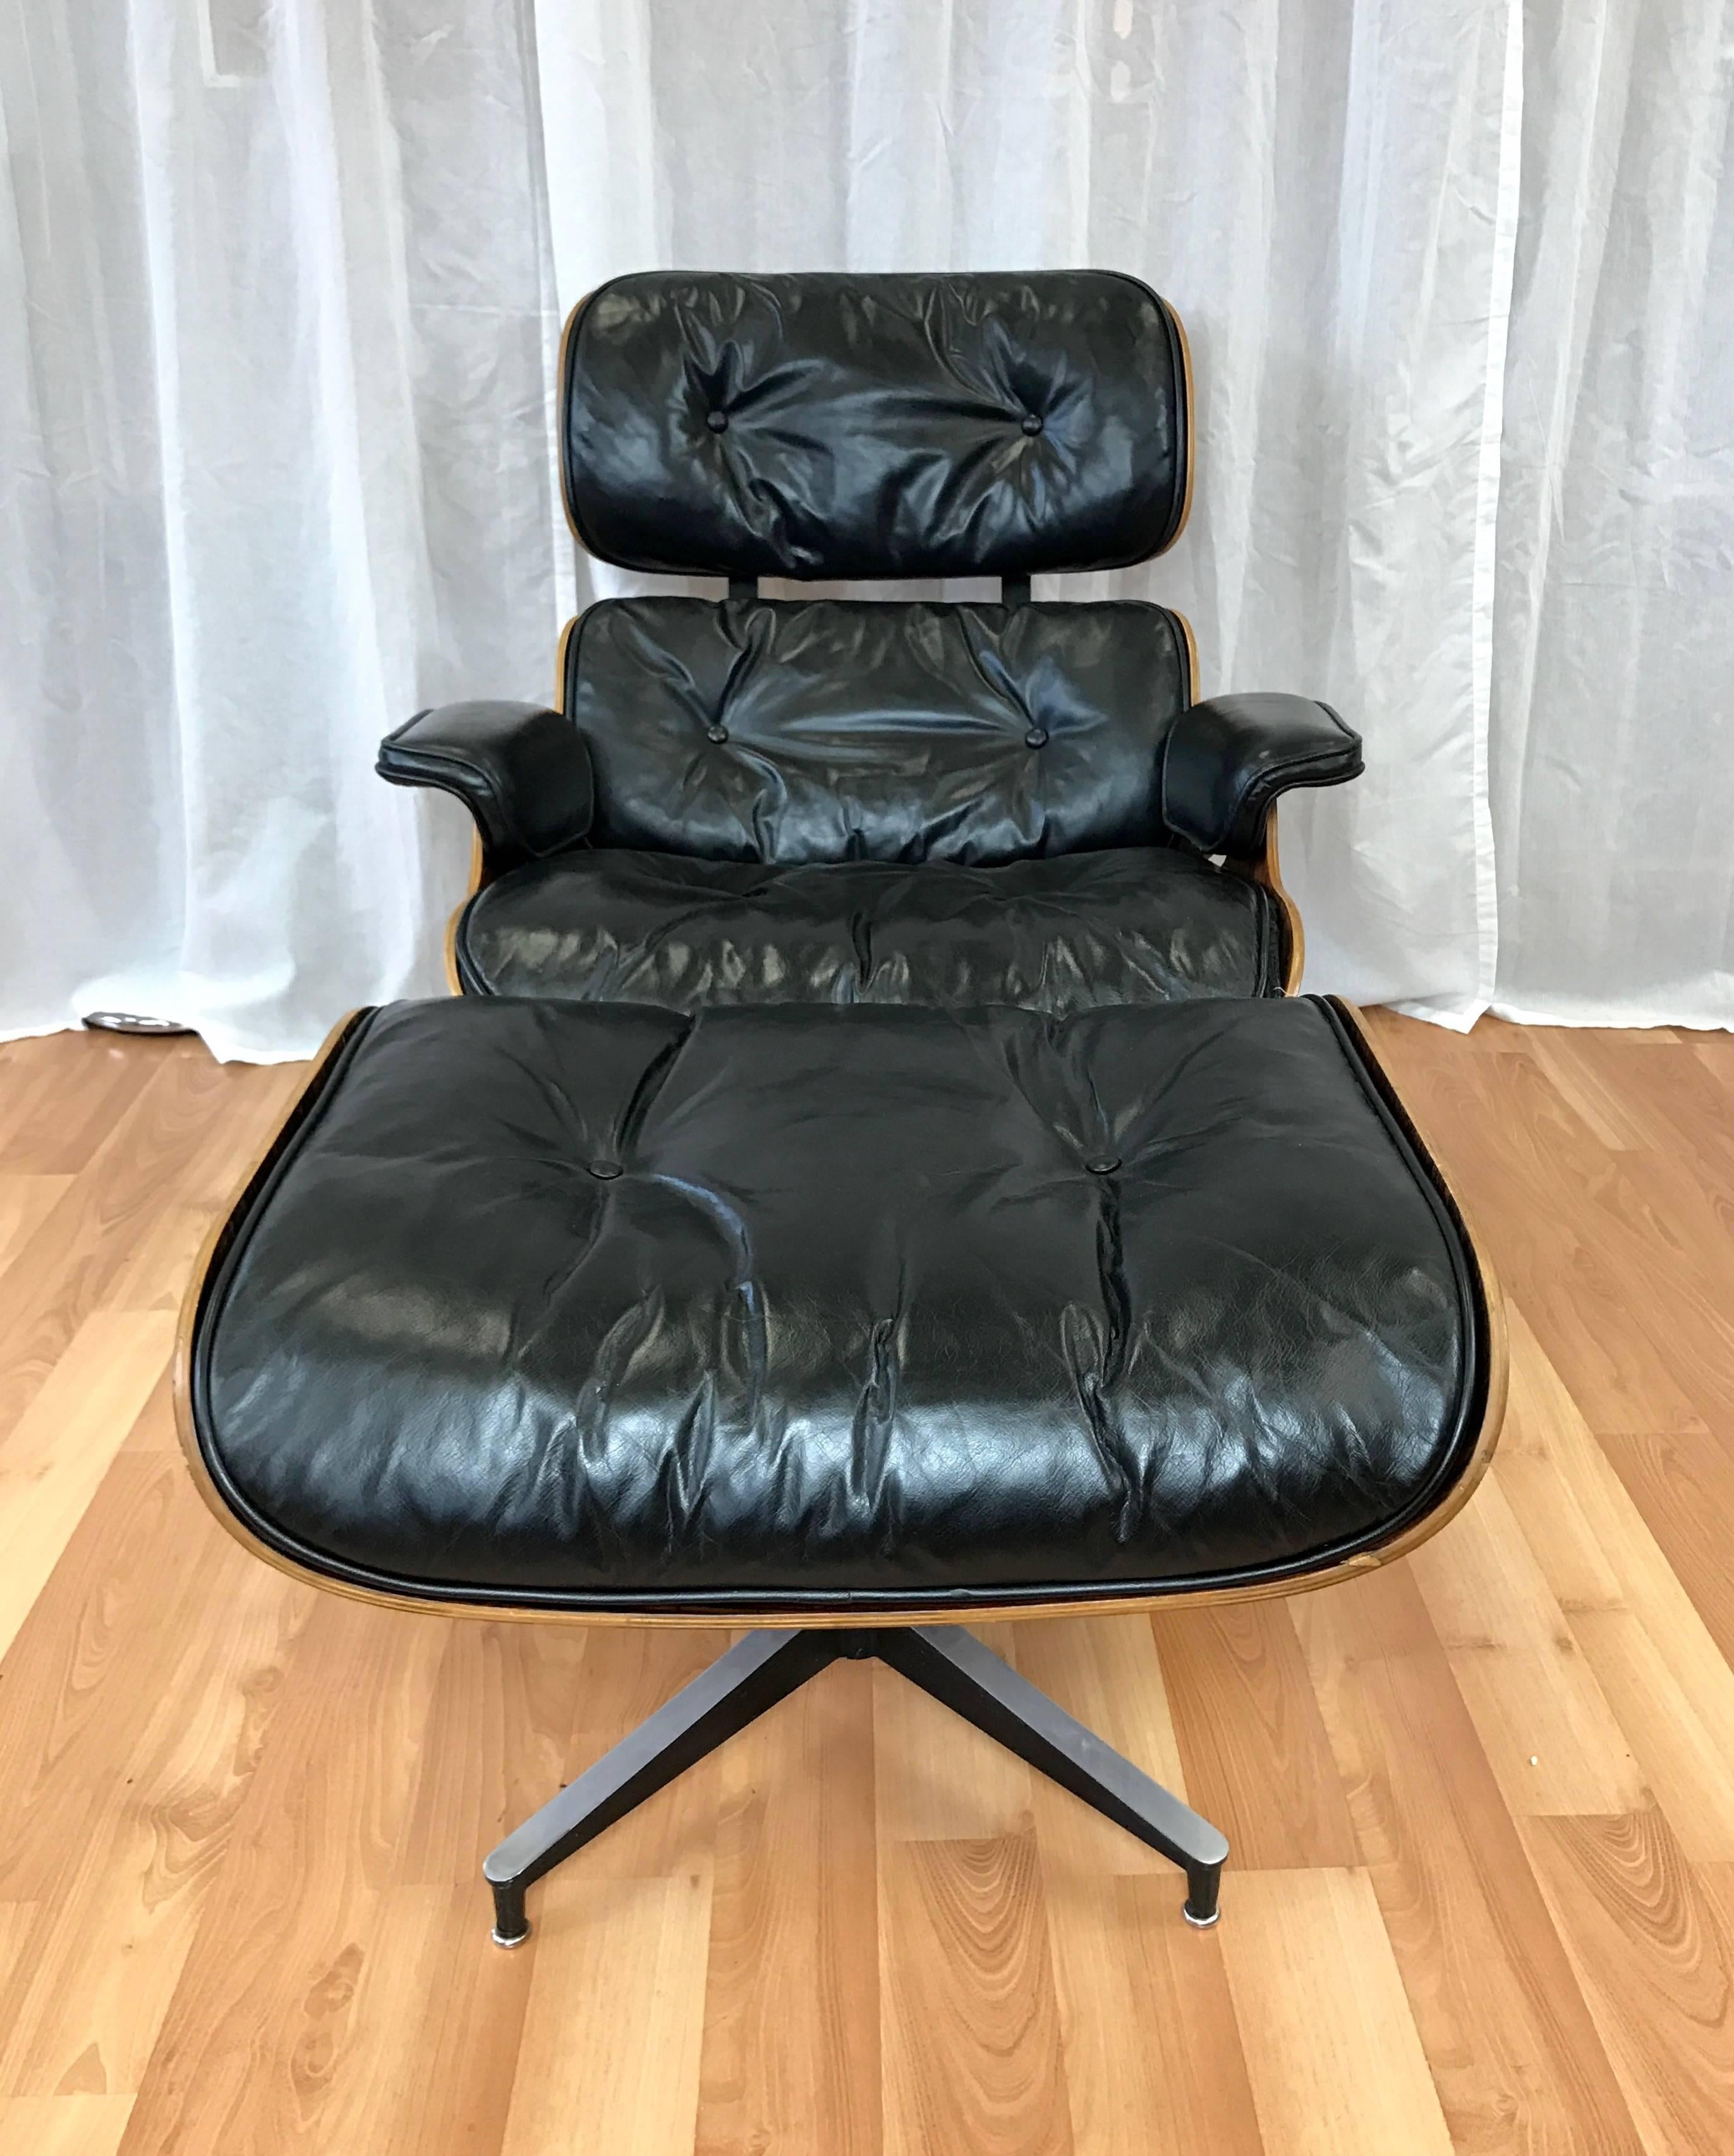 A vintage Eames model 670 lounge chair and ottoman set for Herman Miller in rosewood with black leather upholstery.

Frame features Brazilian rosewood veneer with handsomely figured bookmatched grain. Original black leather upholstery is supple